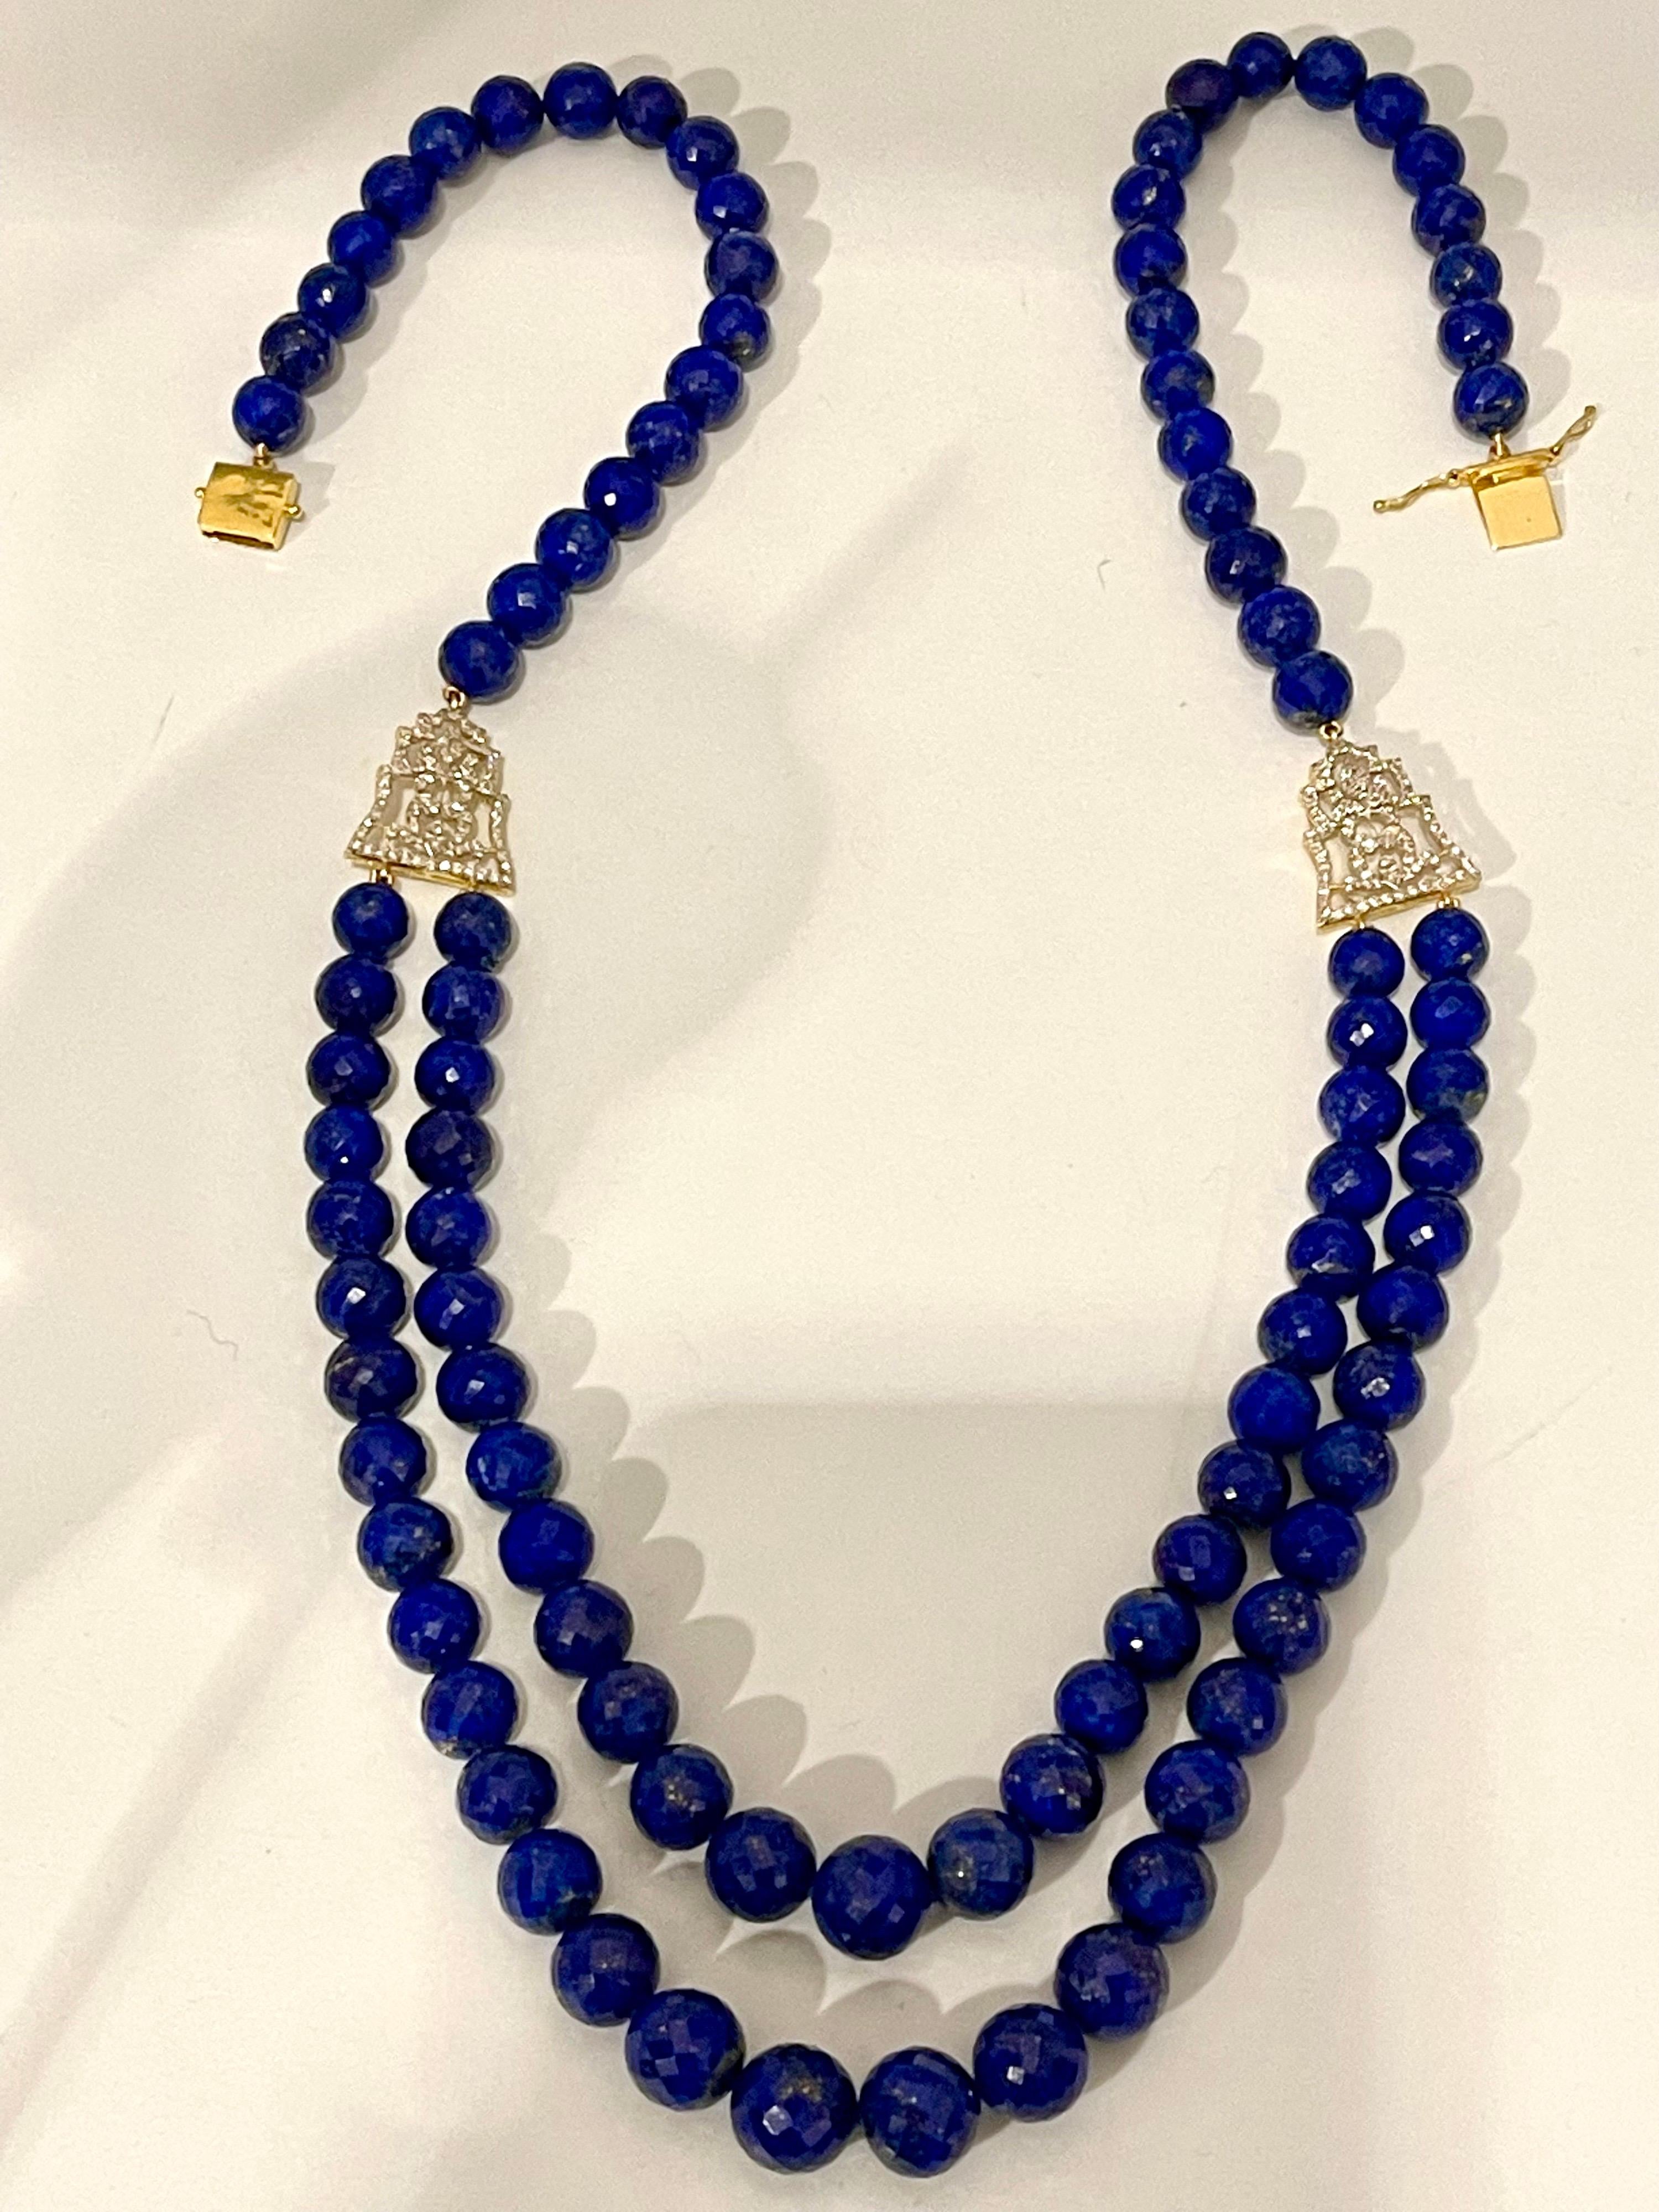 Vintage Lapis Lazuli Double Strand Diamond Necklace 14 Kt Yellow Gold Clasp In Excellent Condition For Sale In New York, NY